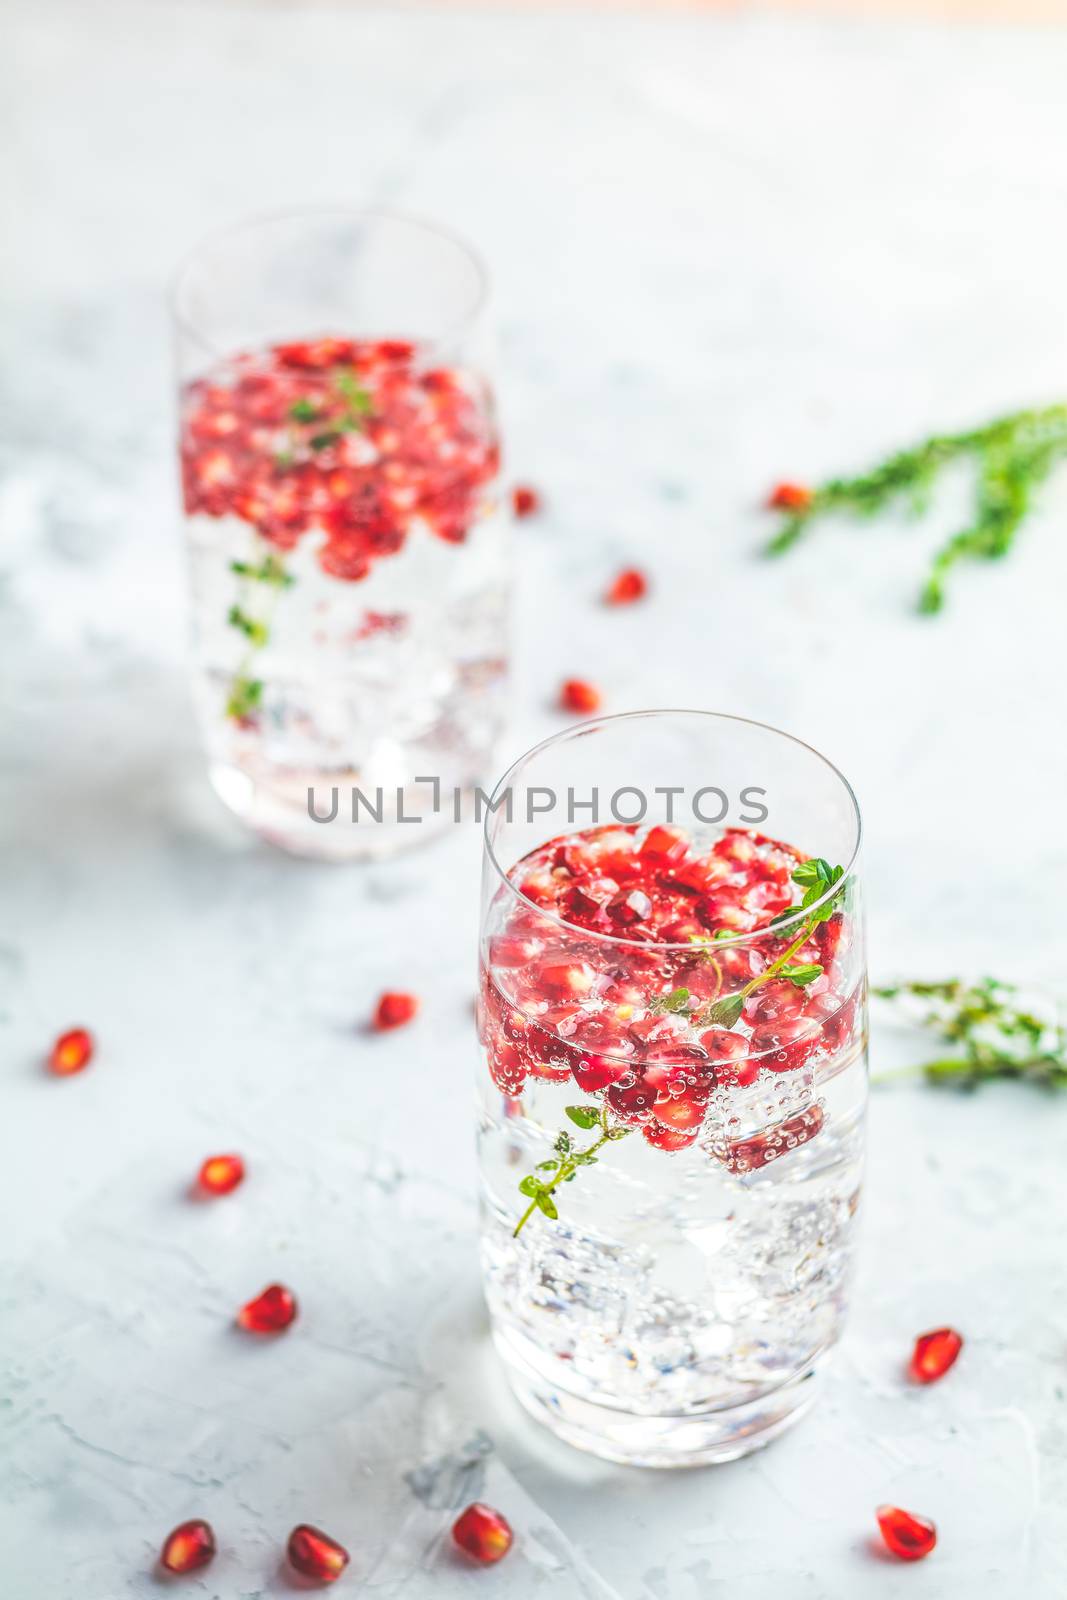 Gin and tonic pomegranate cocktail or detox water with ice by ArtSvitlyna